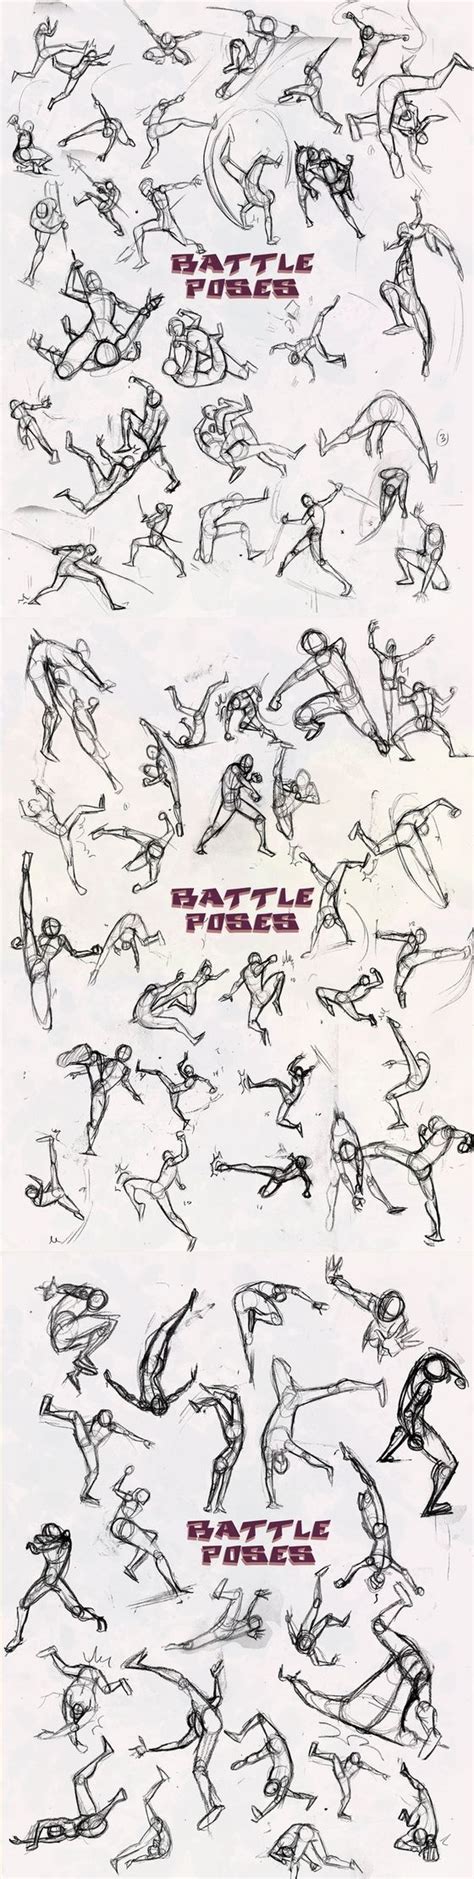 battle poses art reference drawing poses figure drawing reference